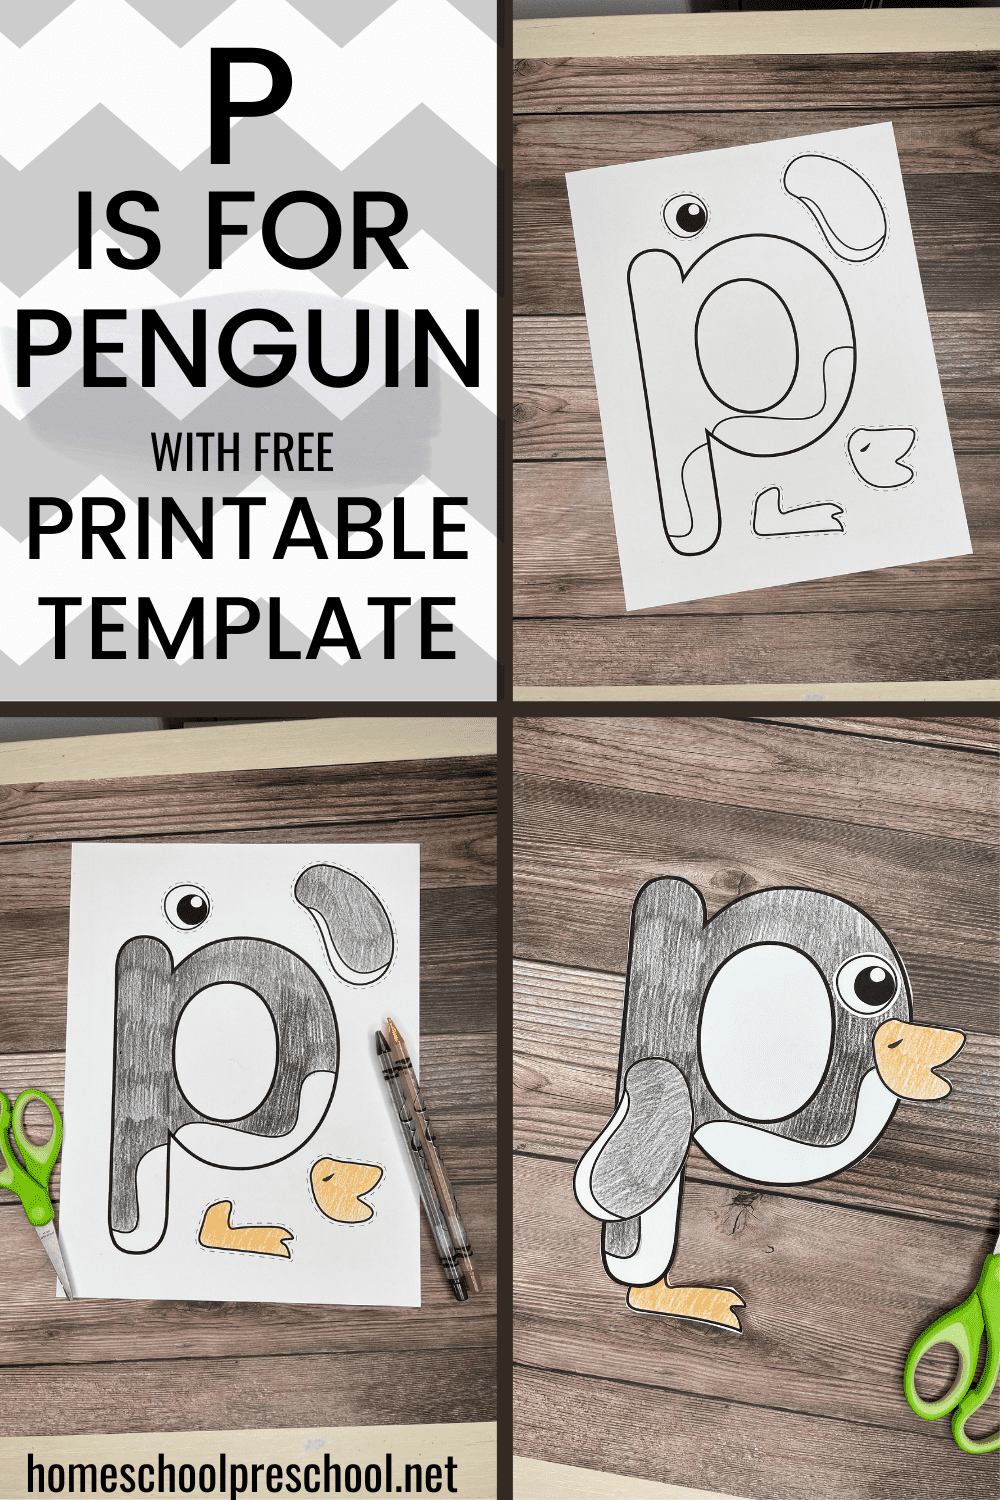 P is for Penguin Craft